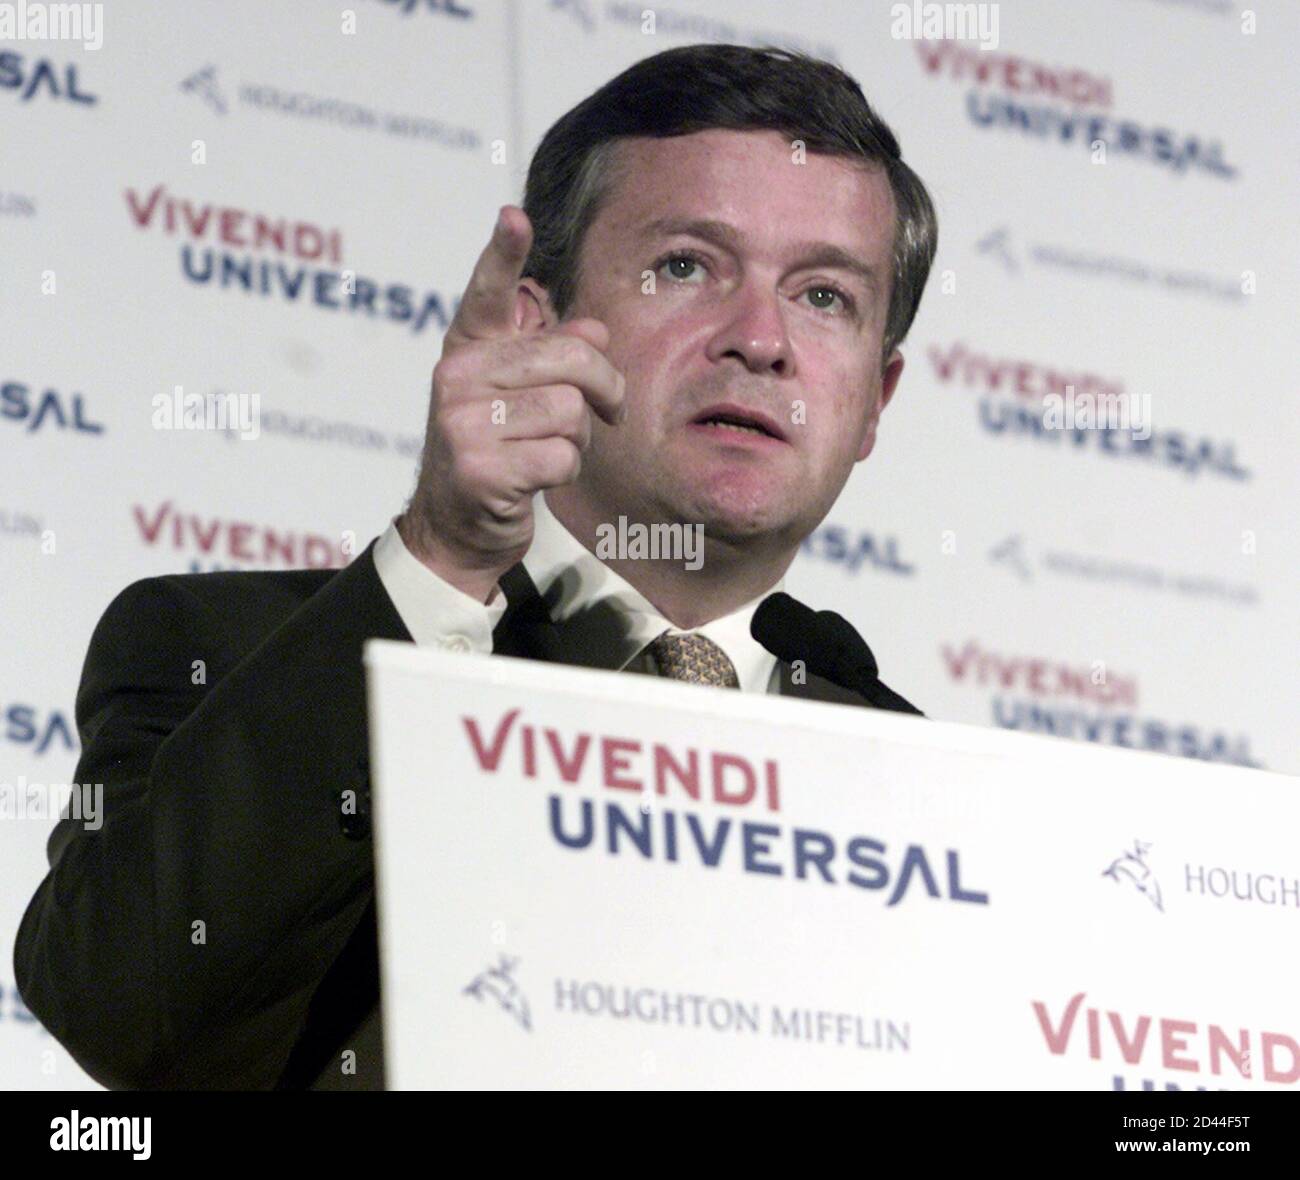 Jean-Marie Messier, Chairman and CEO Vivendi Universal, makes a point during a news conference June 1, 2001 in New York, where the it was announced that Vivendi Universal has agreed to acquire Houghton Mifflin. Vivendi Universal has agreed to acquire all of the outstanding shares of Houghton Mifflin, pursuant to a cash tender offer of $60 per share. Stock Photo